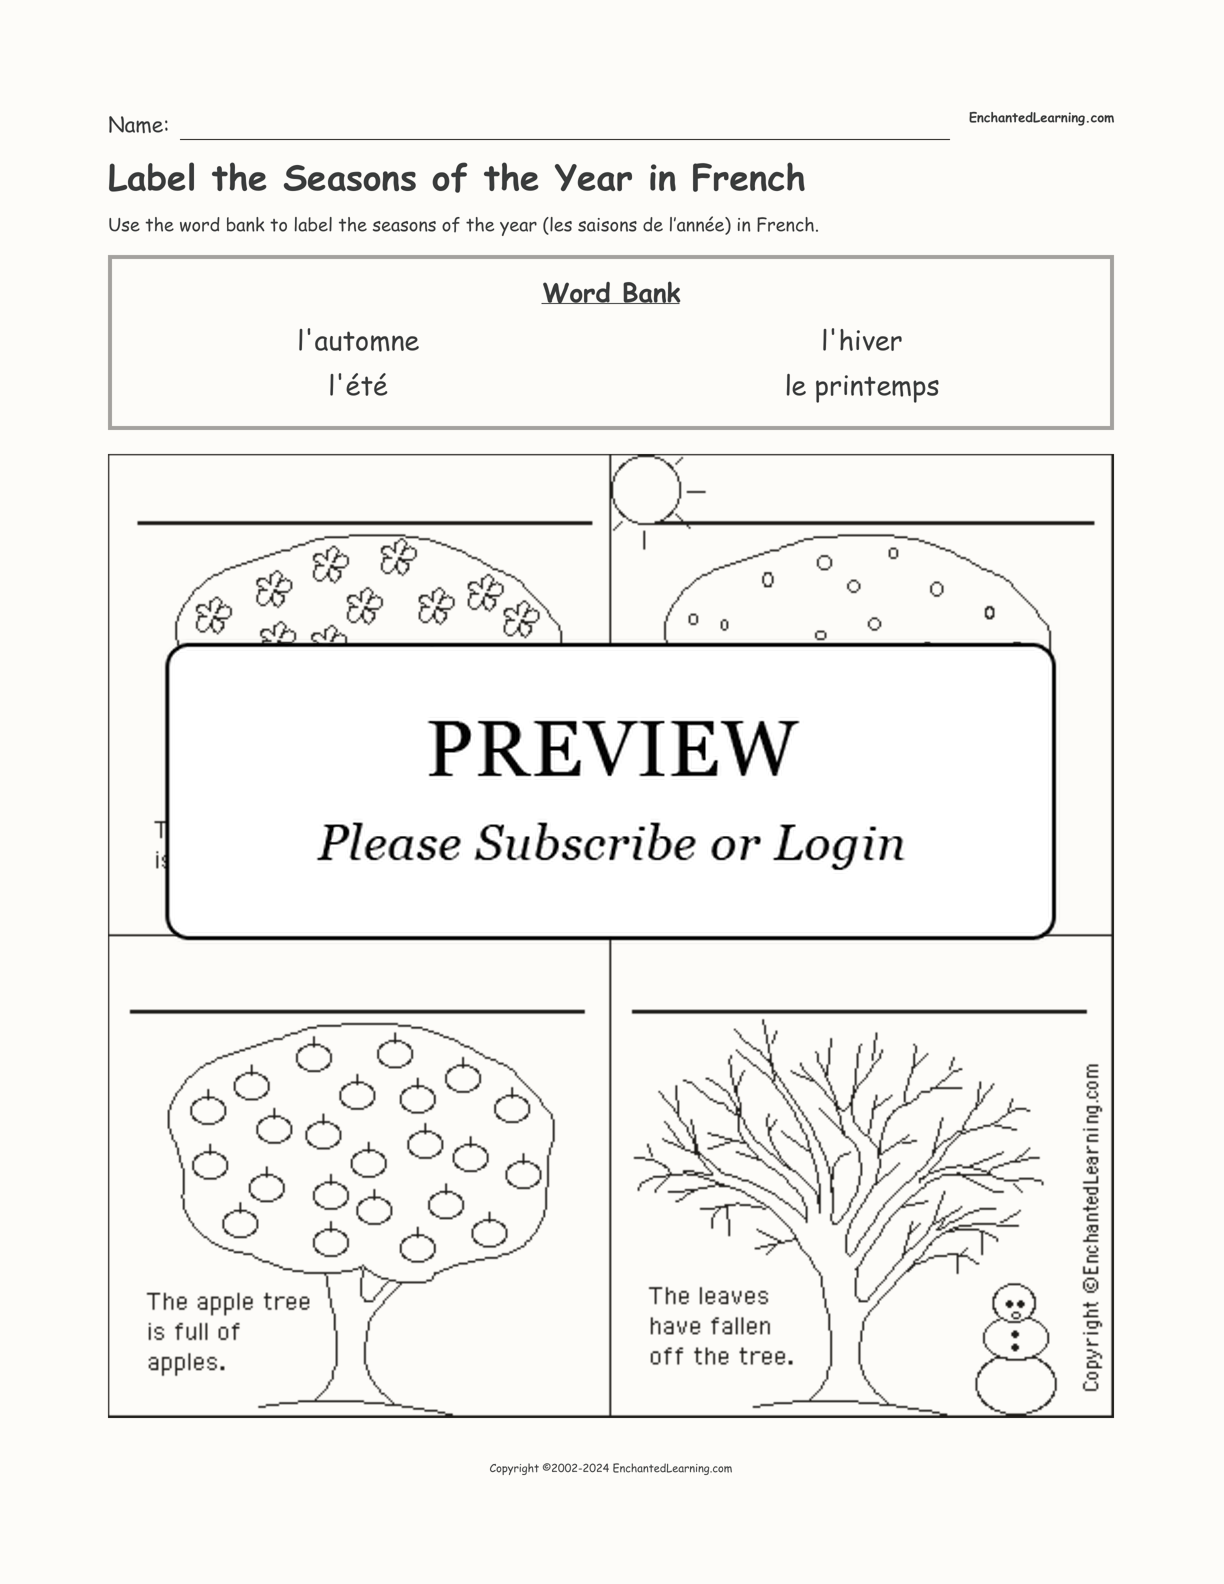 Label the Seasons of the Year in French interactive worksheet page 1